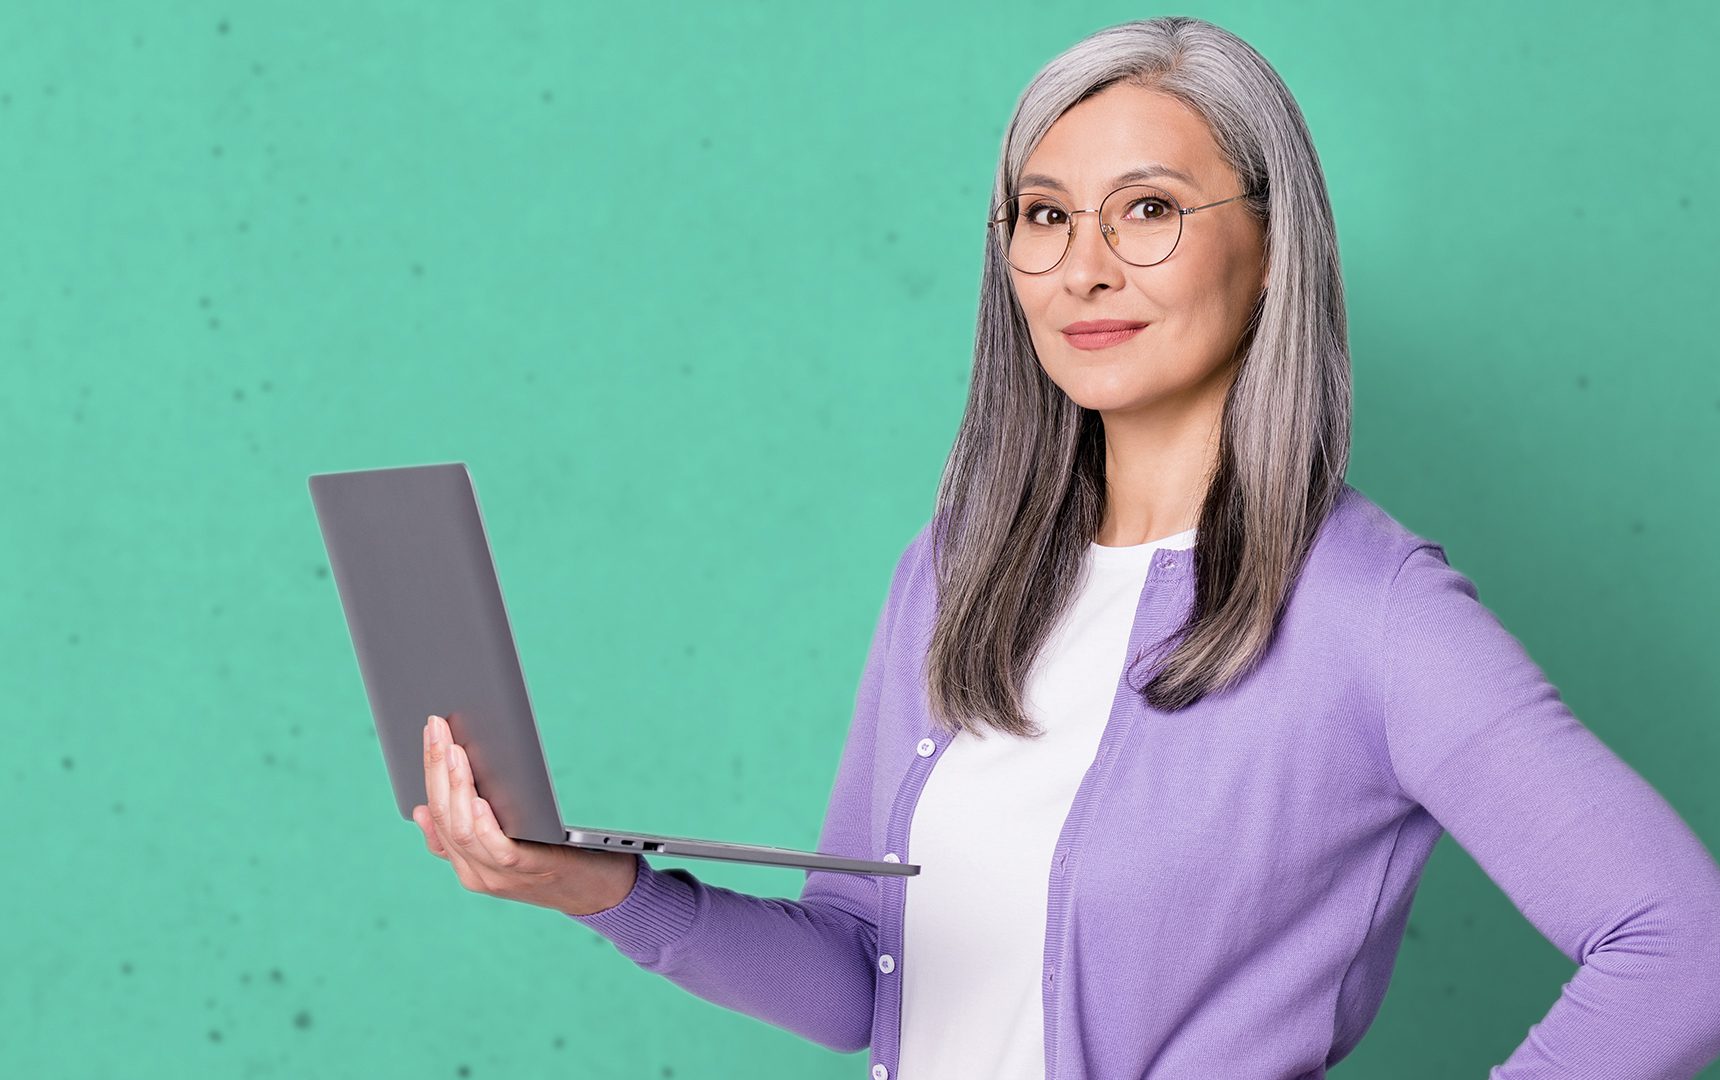 Woman smiling holding laptop in right hand against turquoise background